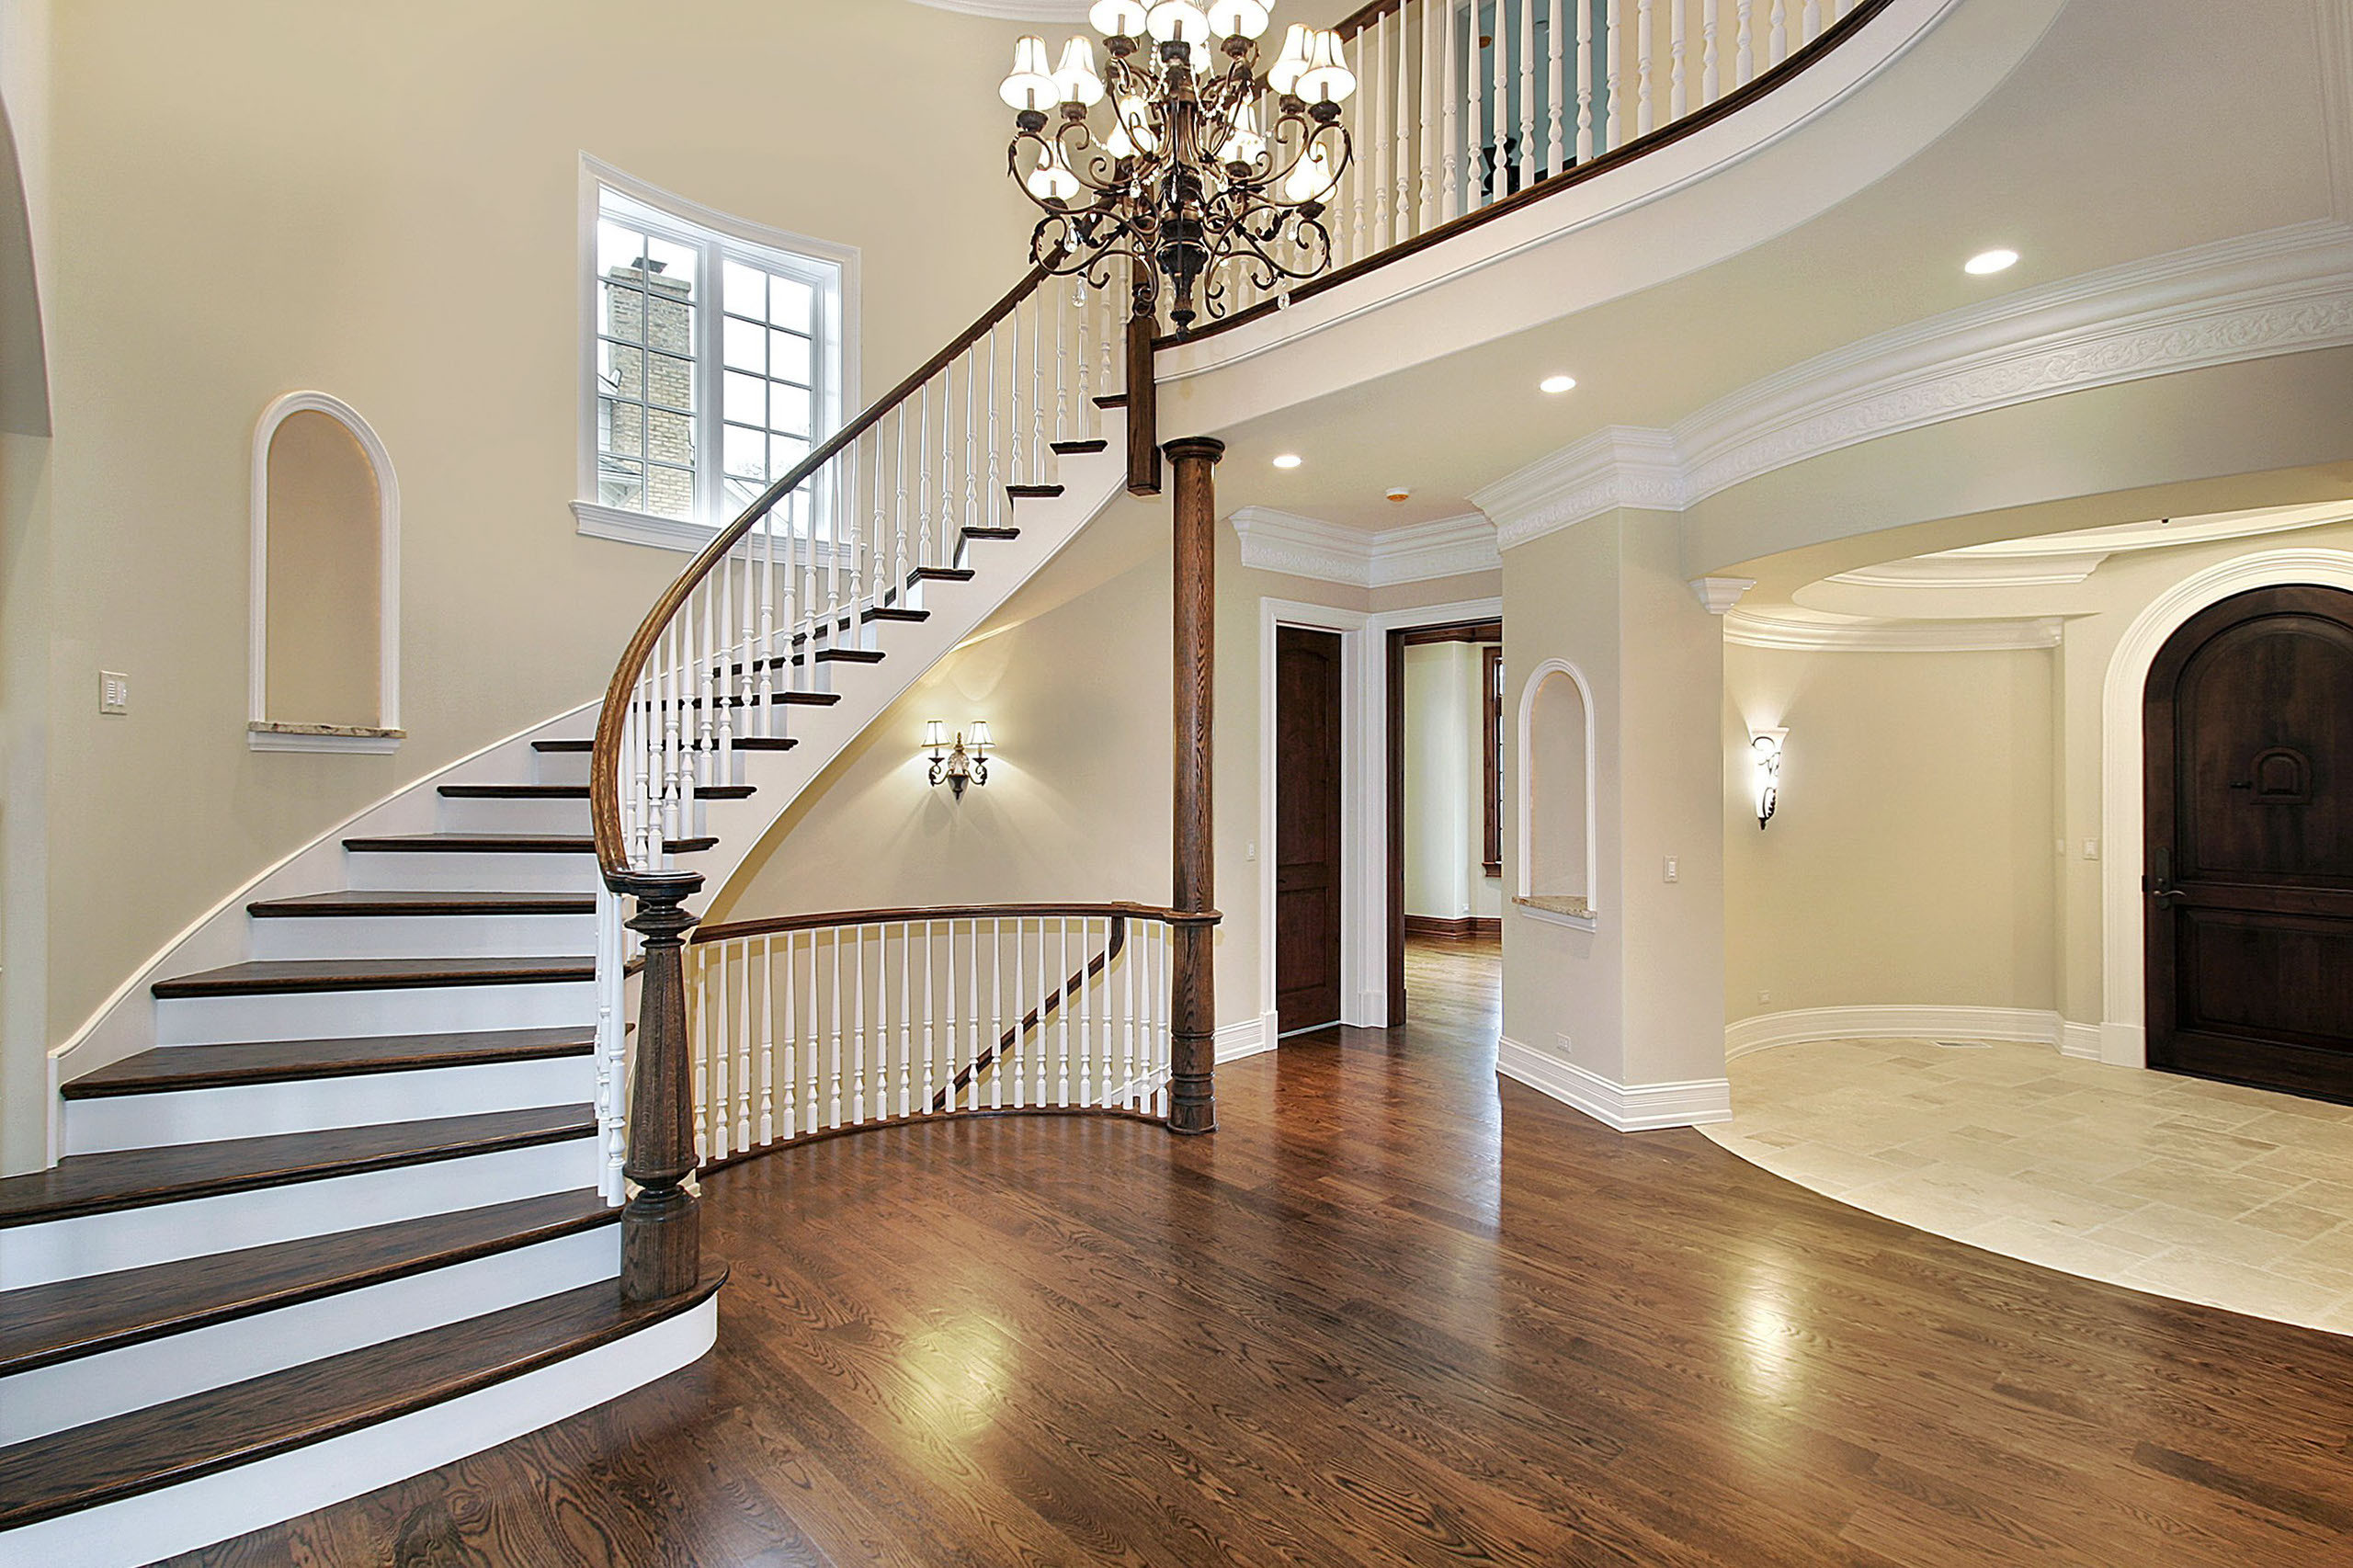 hardwood floor refinishing barrie ontario of hardwood floor decor and care intended for curvedstairs1